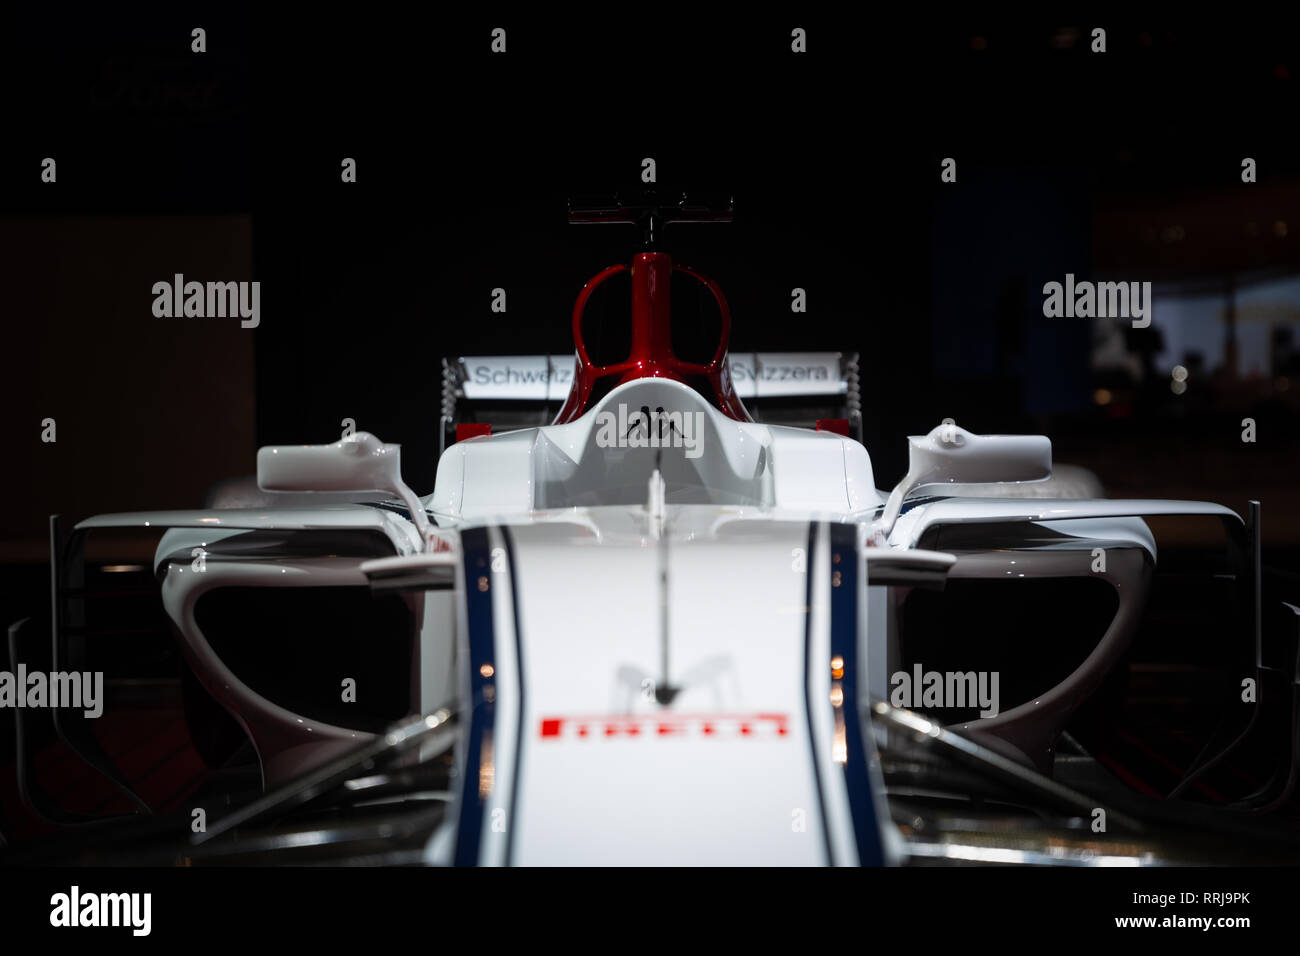 Head on shot of the 2017 Sauber F1 Show car at the 2019 Chicago auto show Stock Photo